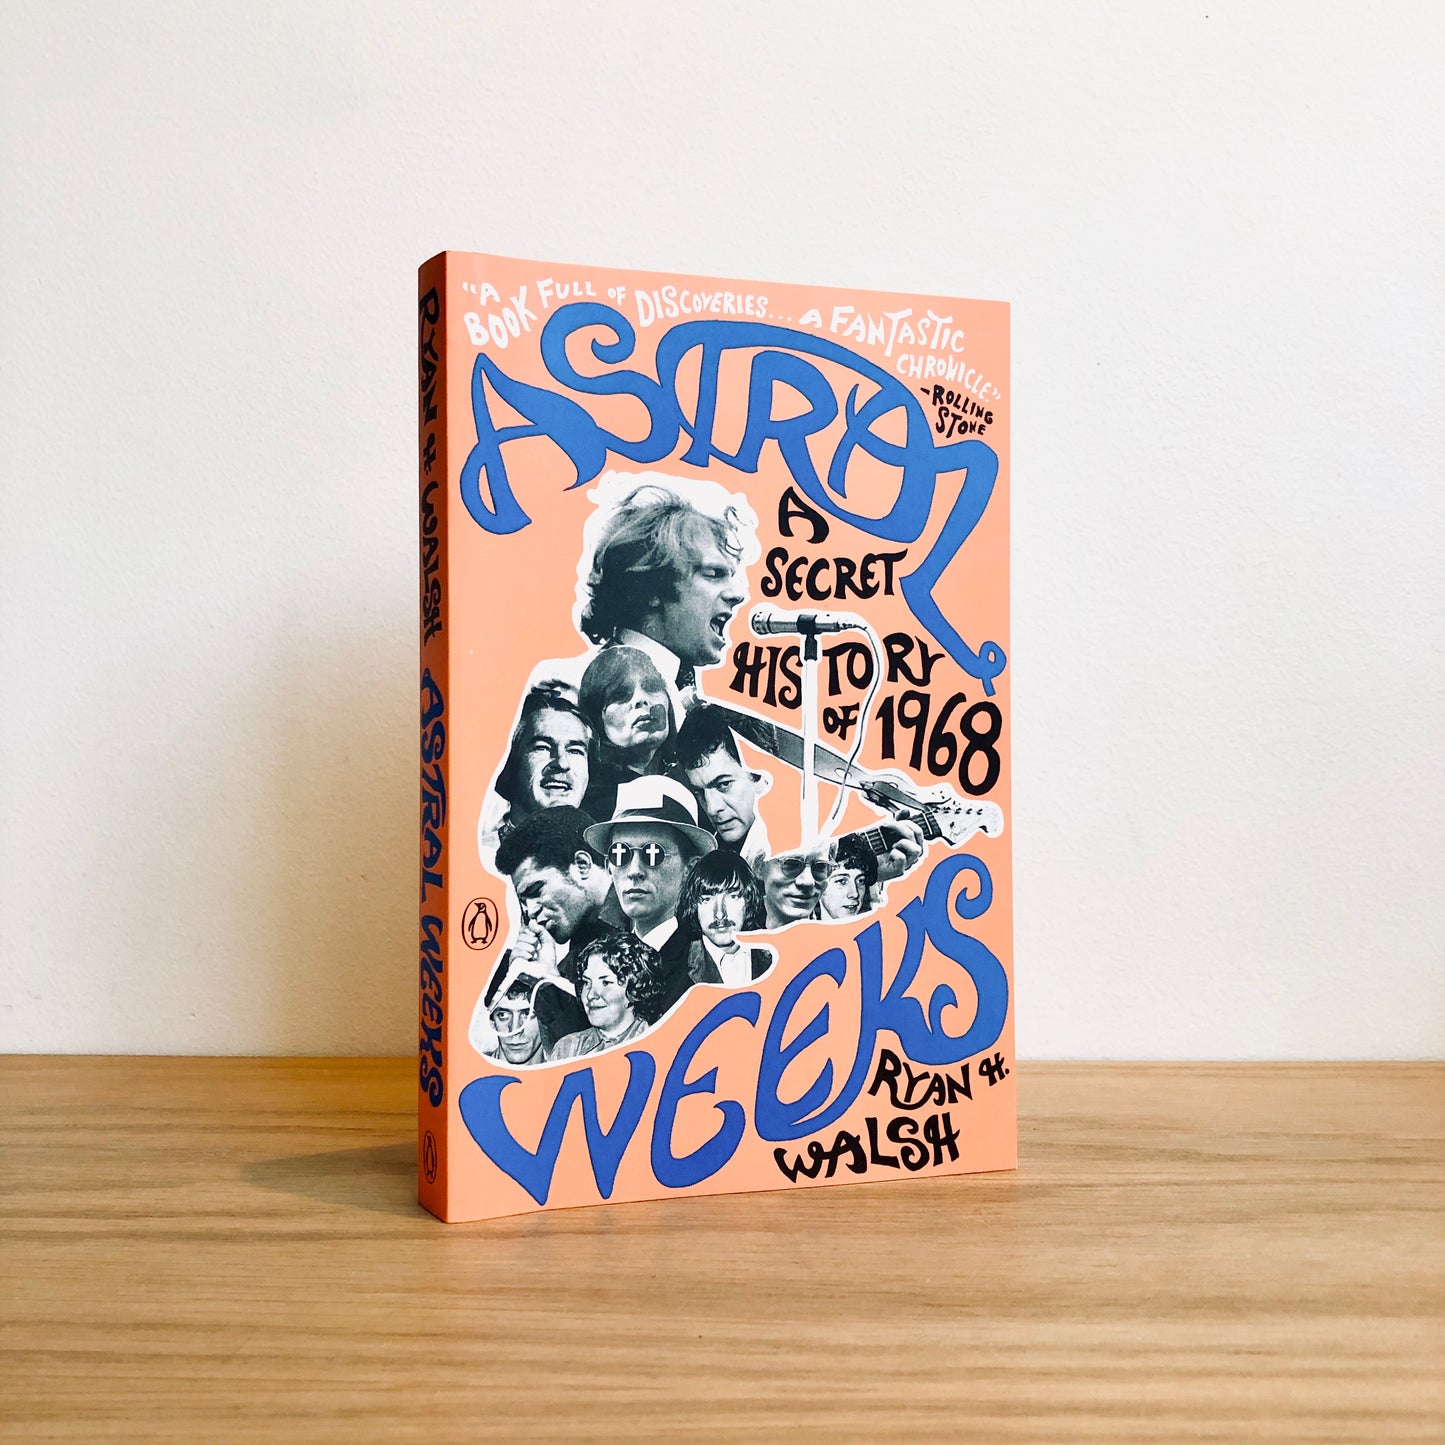 Astral Weeks By Ryan H. Walsh - A Secret History Of 1968